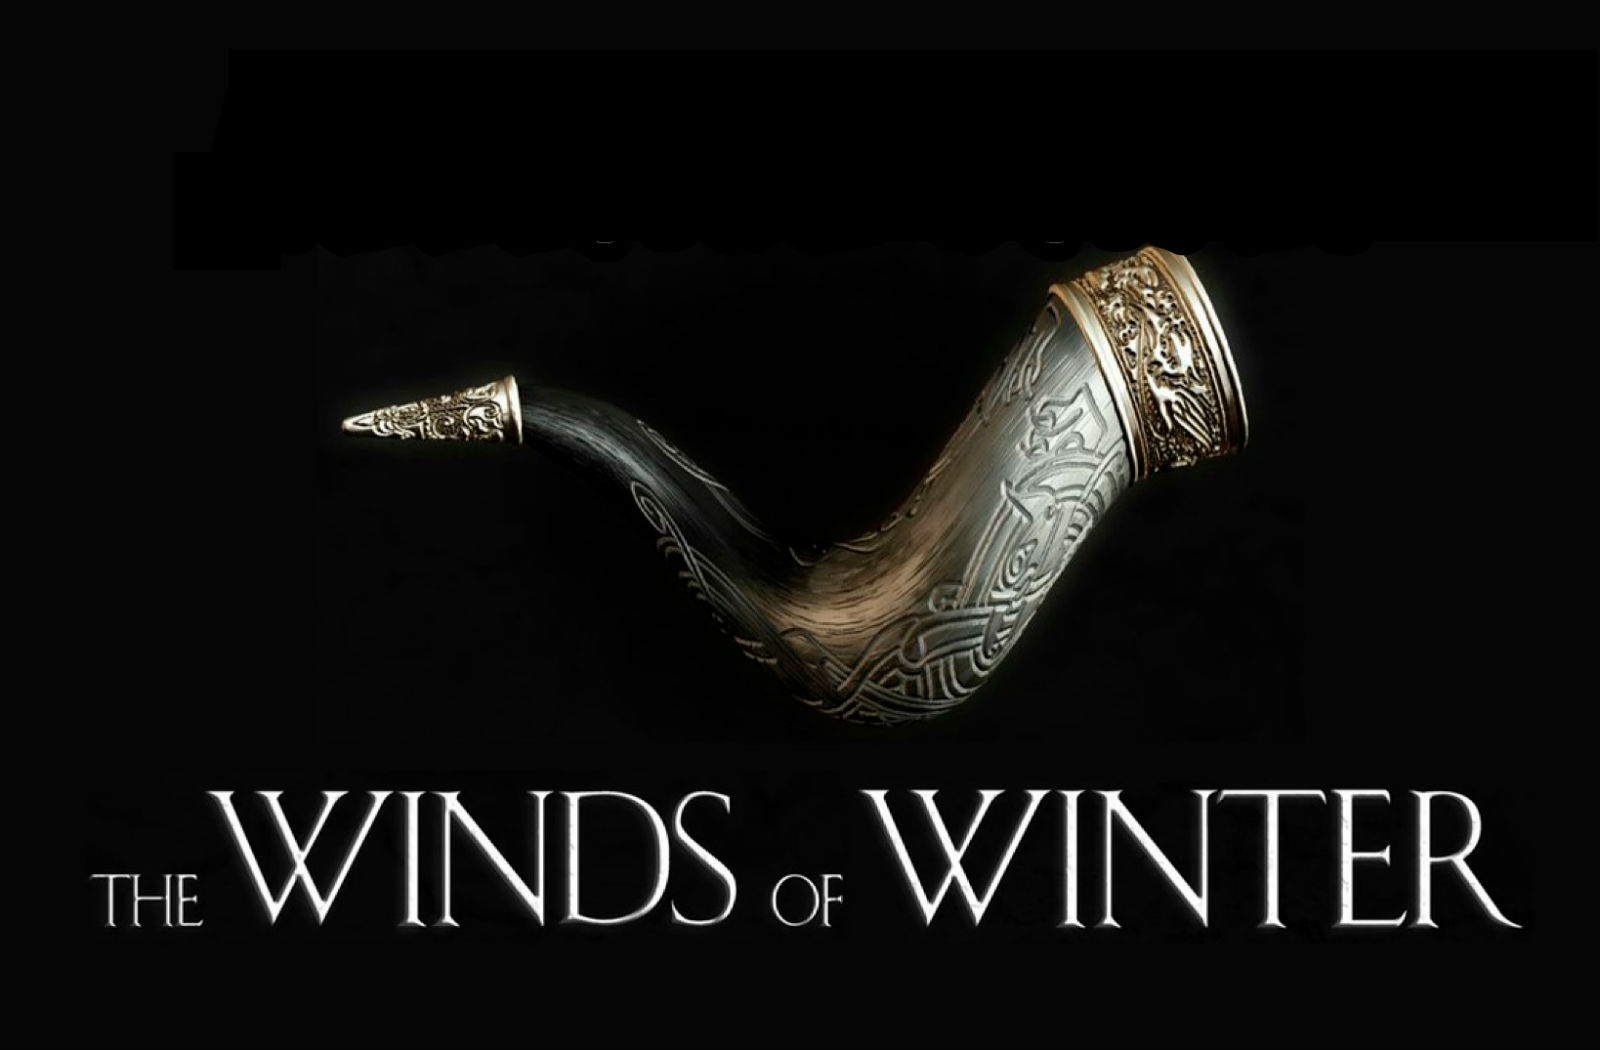 A small update on ‘the winds of winter’